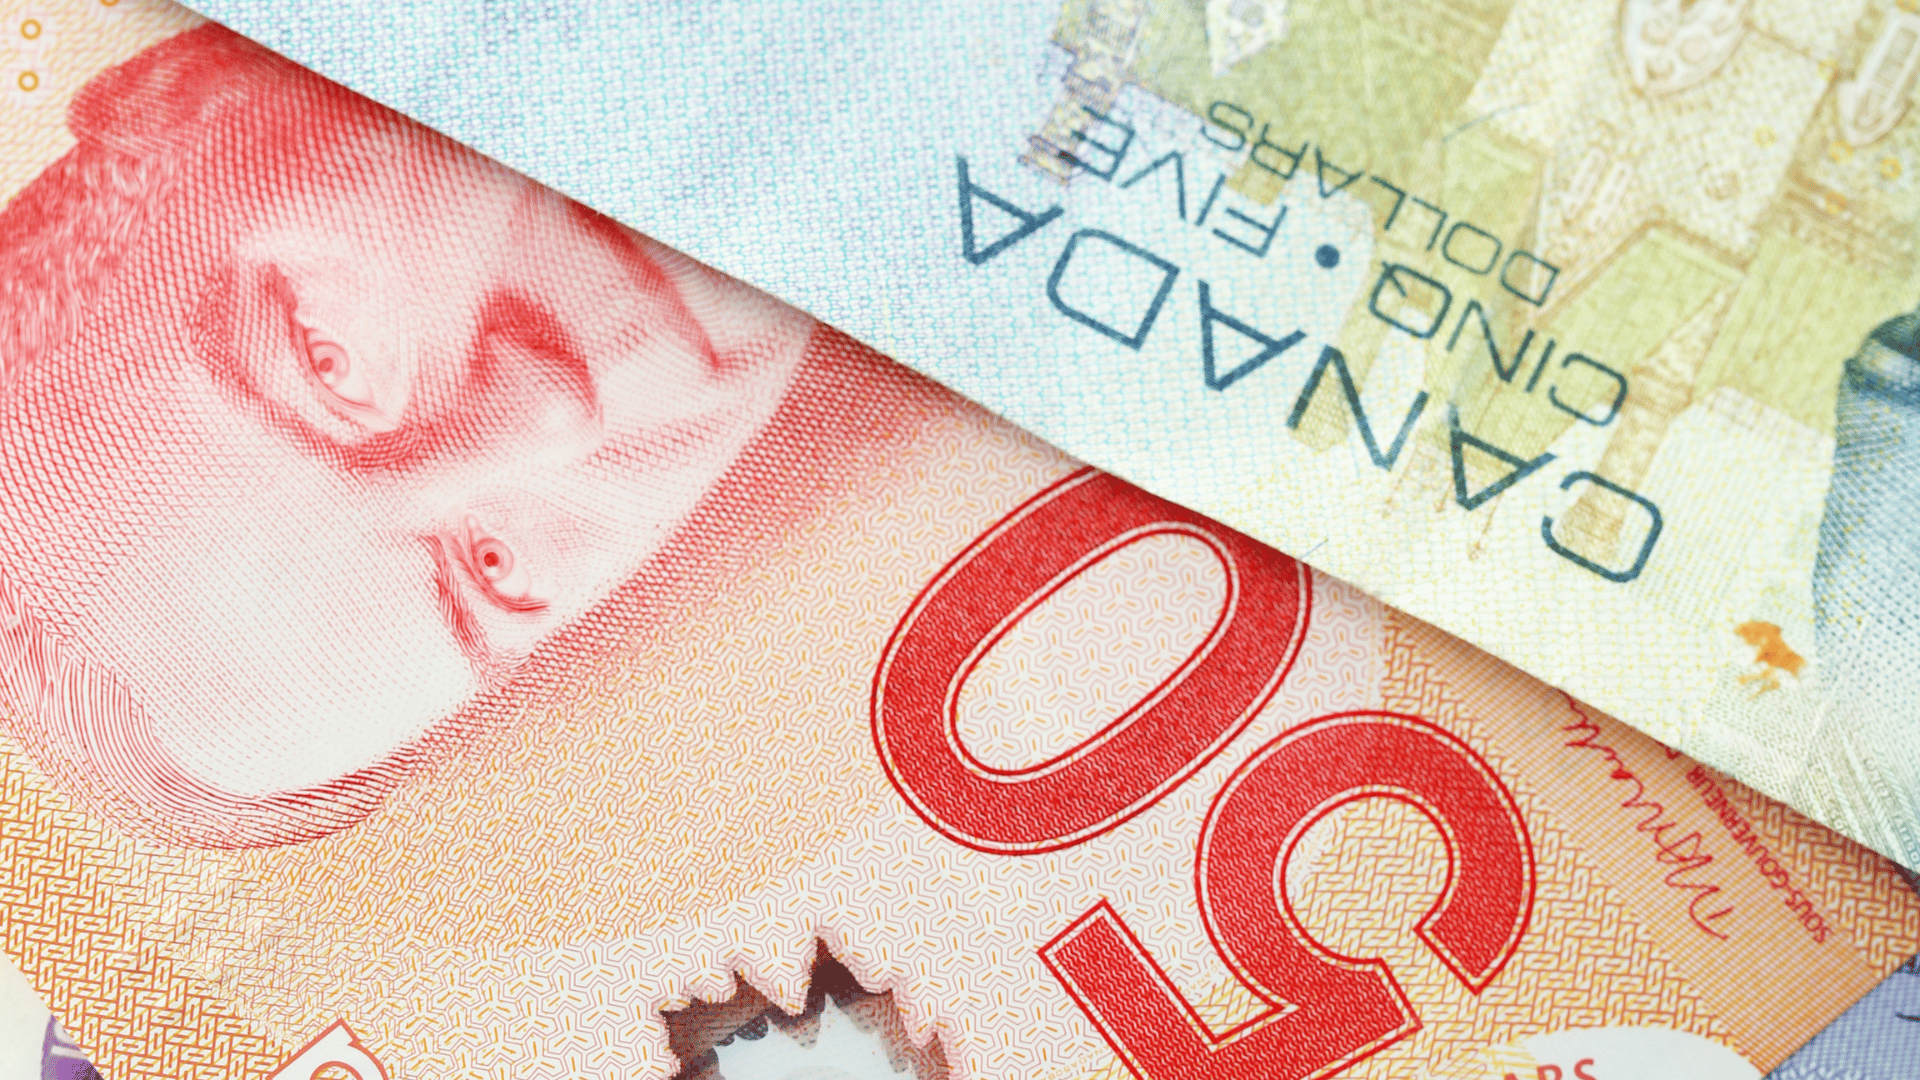 An image of Canadian currency